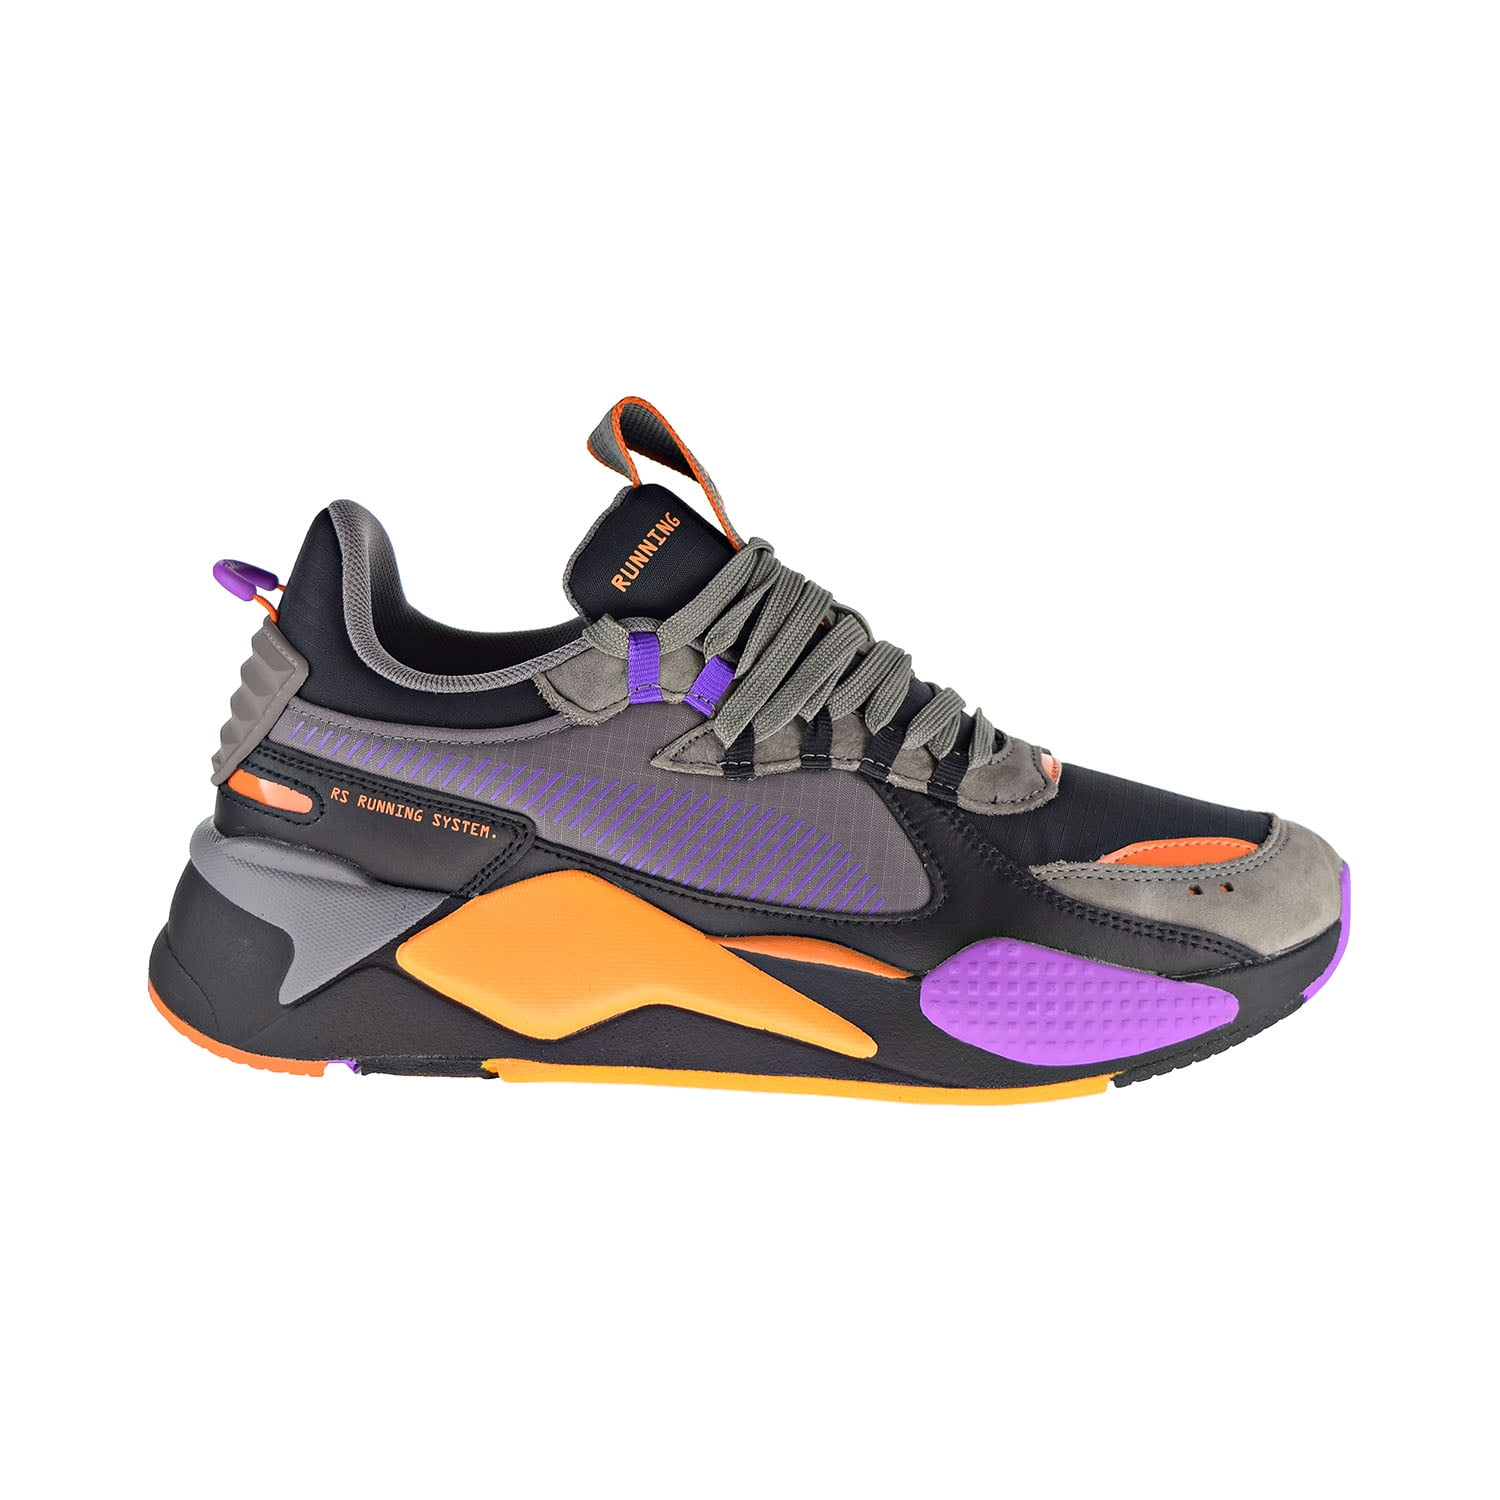 Puma RS-X OH Men's Shoes Black-Pur Glimmer-Steel Gray 372803-01 